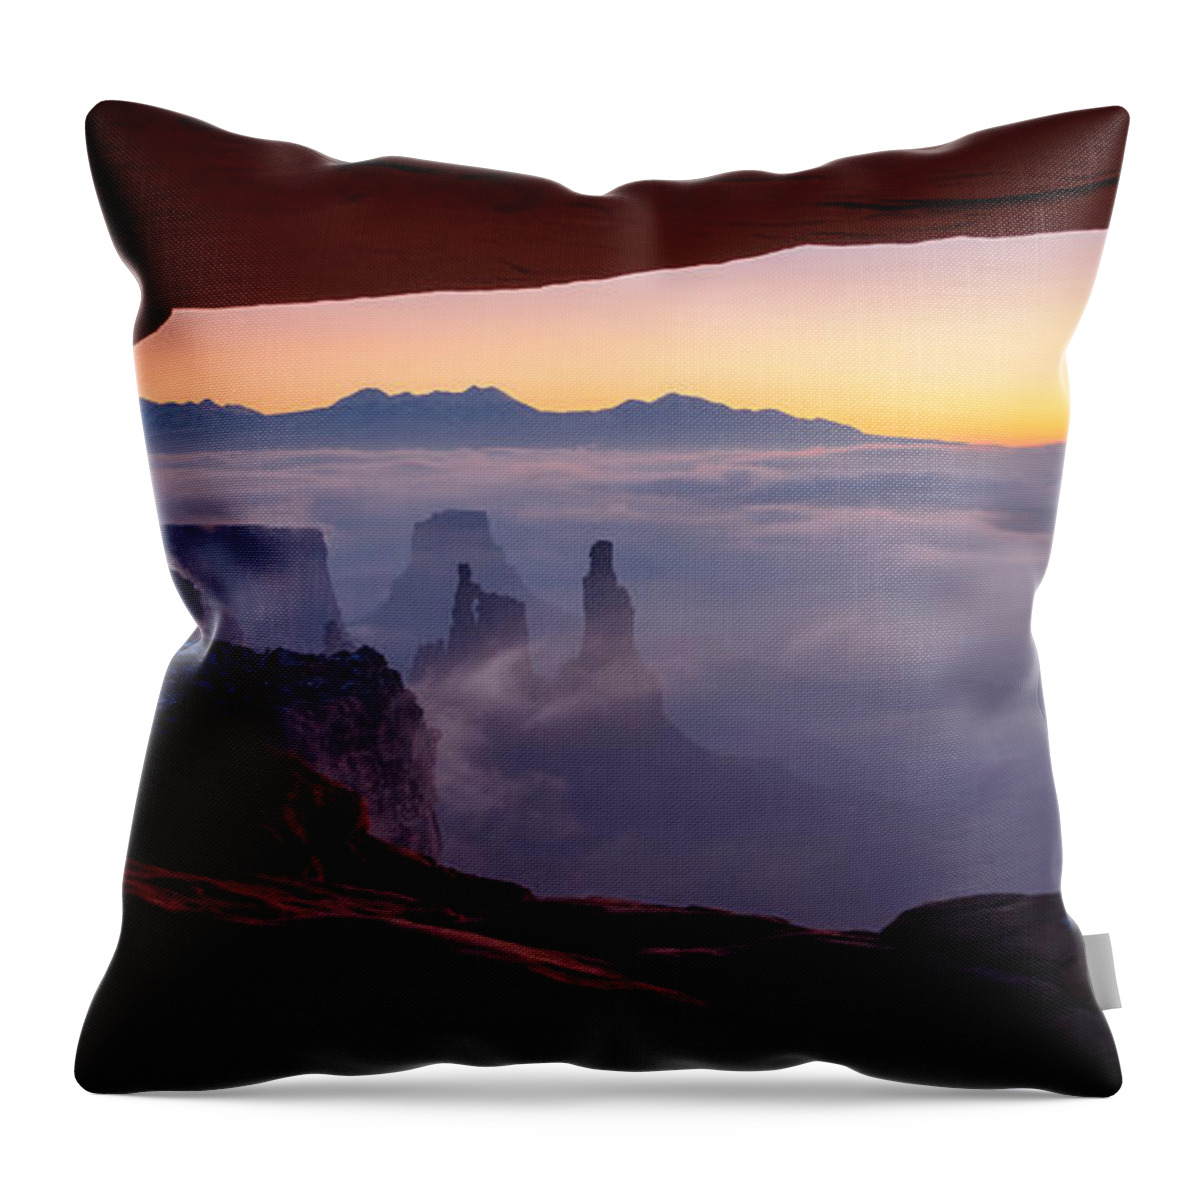 Canyonlands Throw Pillow featuring the photograph Mesa Mist by Chad Dutson